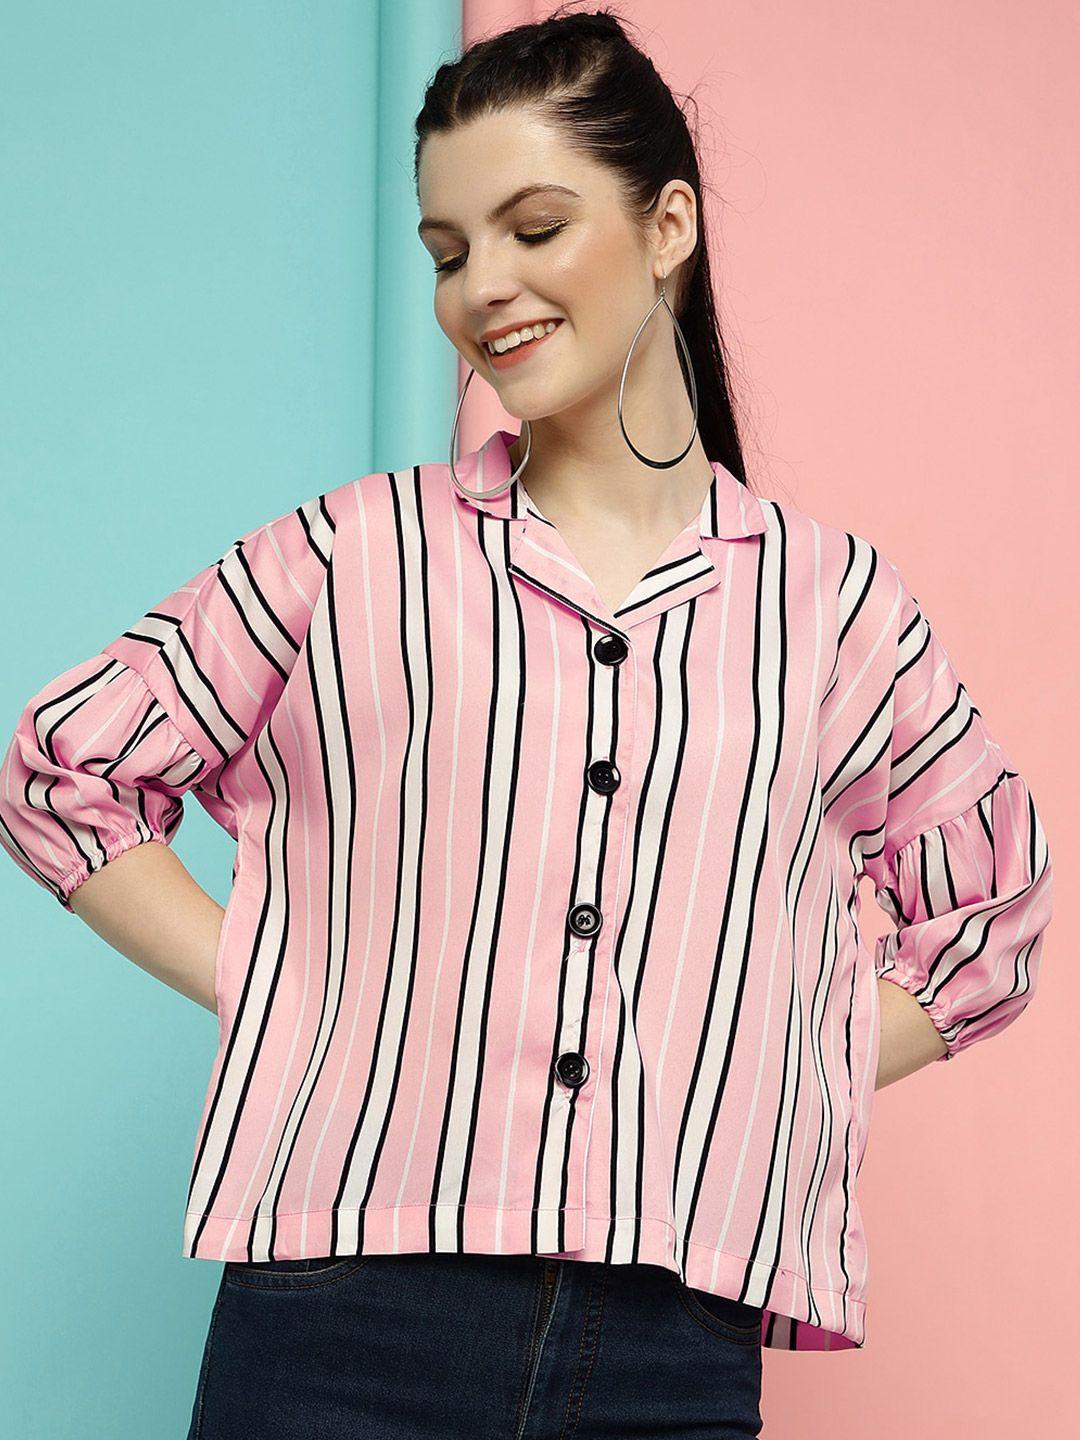 clemira vertical stripes printed cuben collar extended sleeves shirt style top